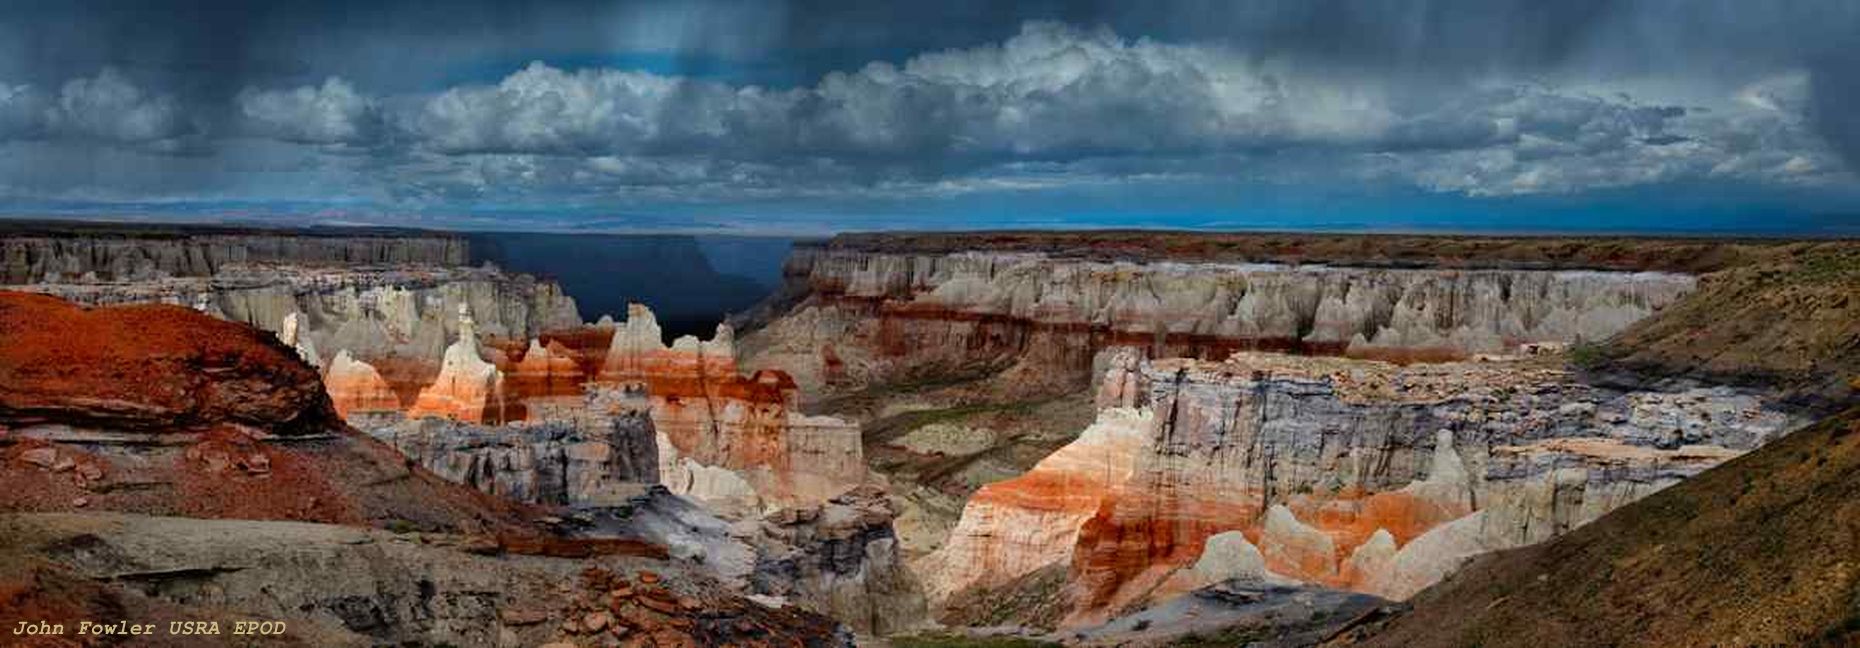 Panoramic view of the canyon